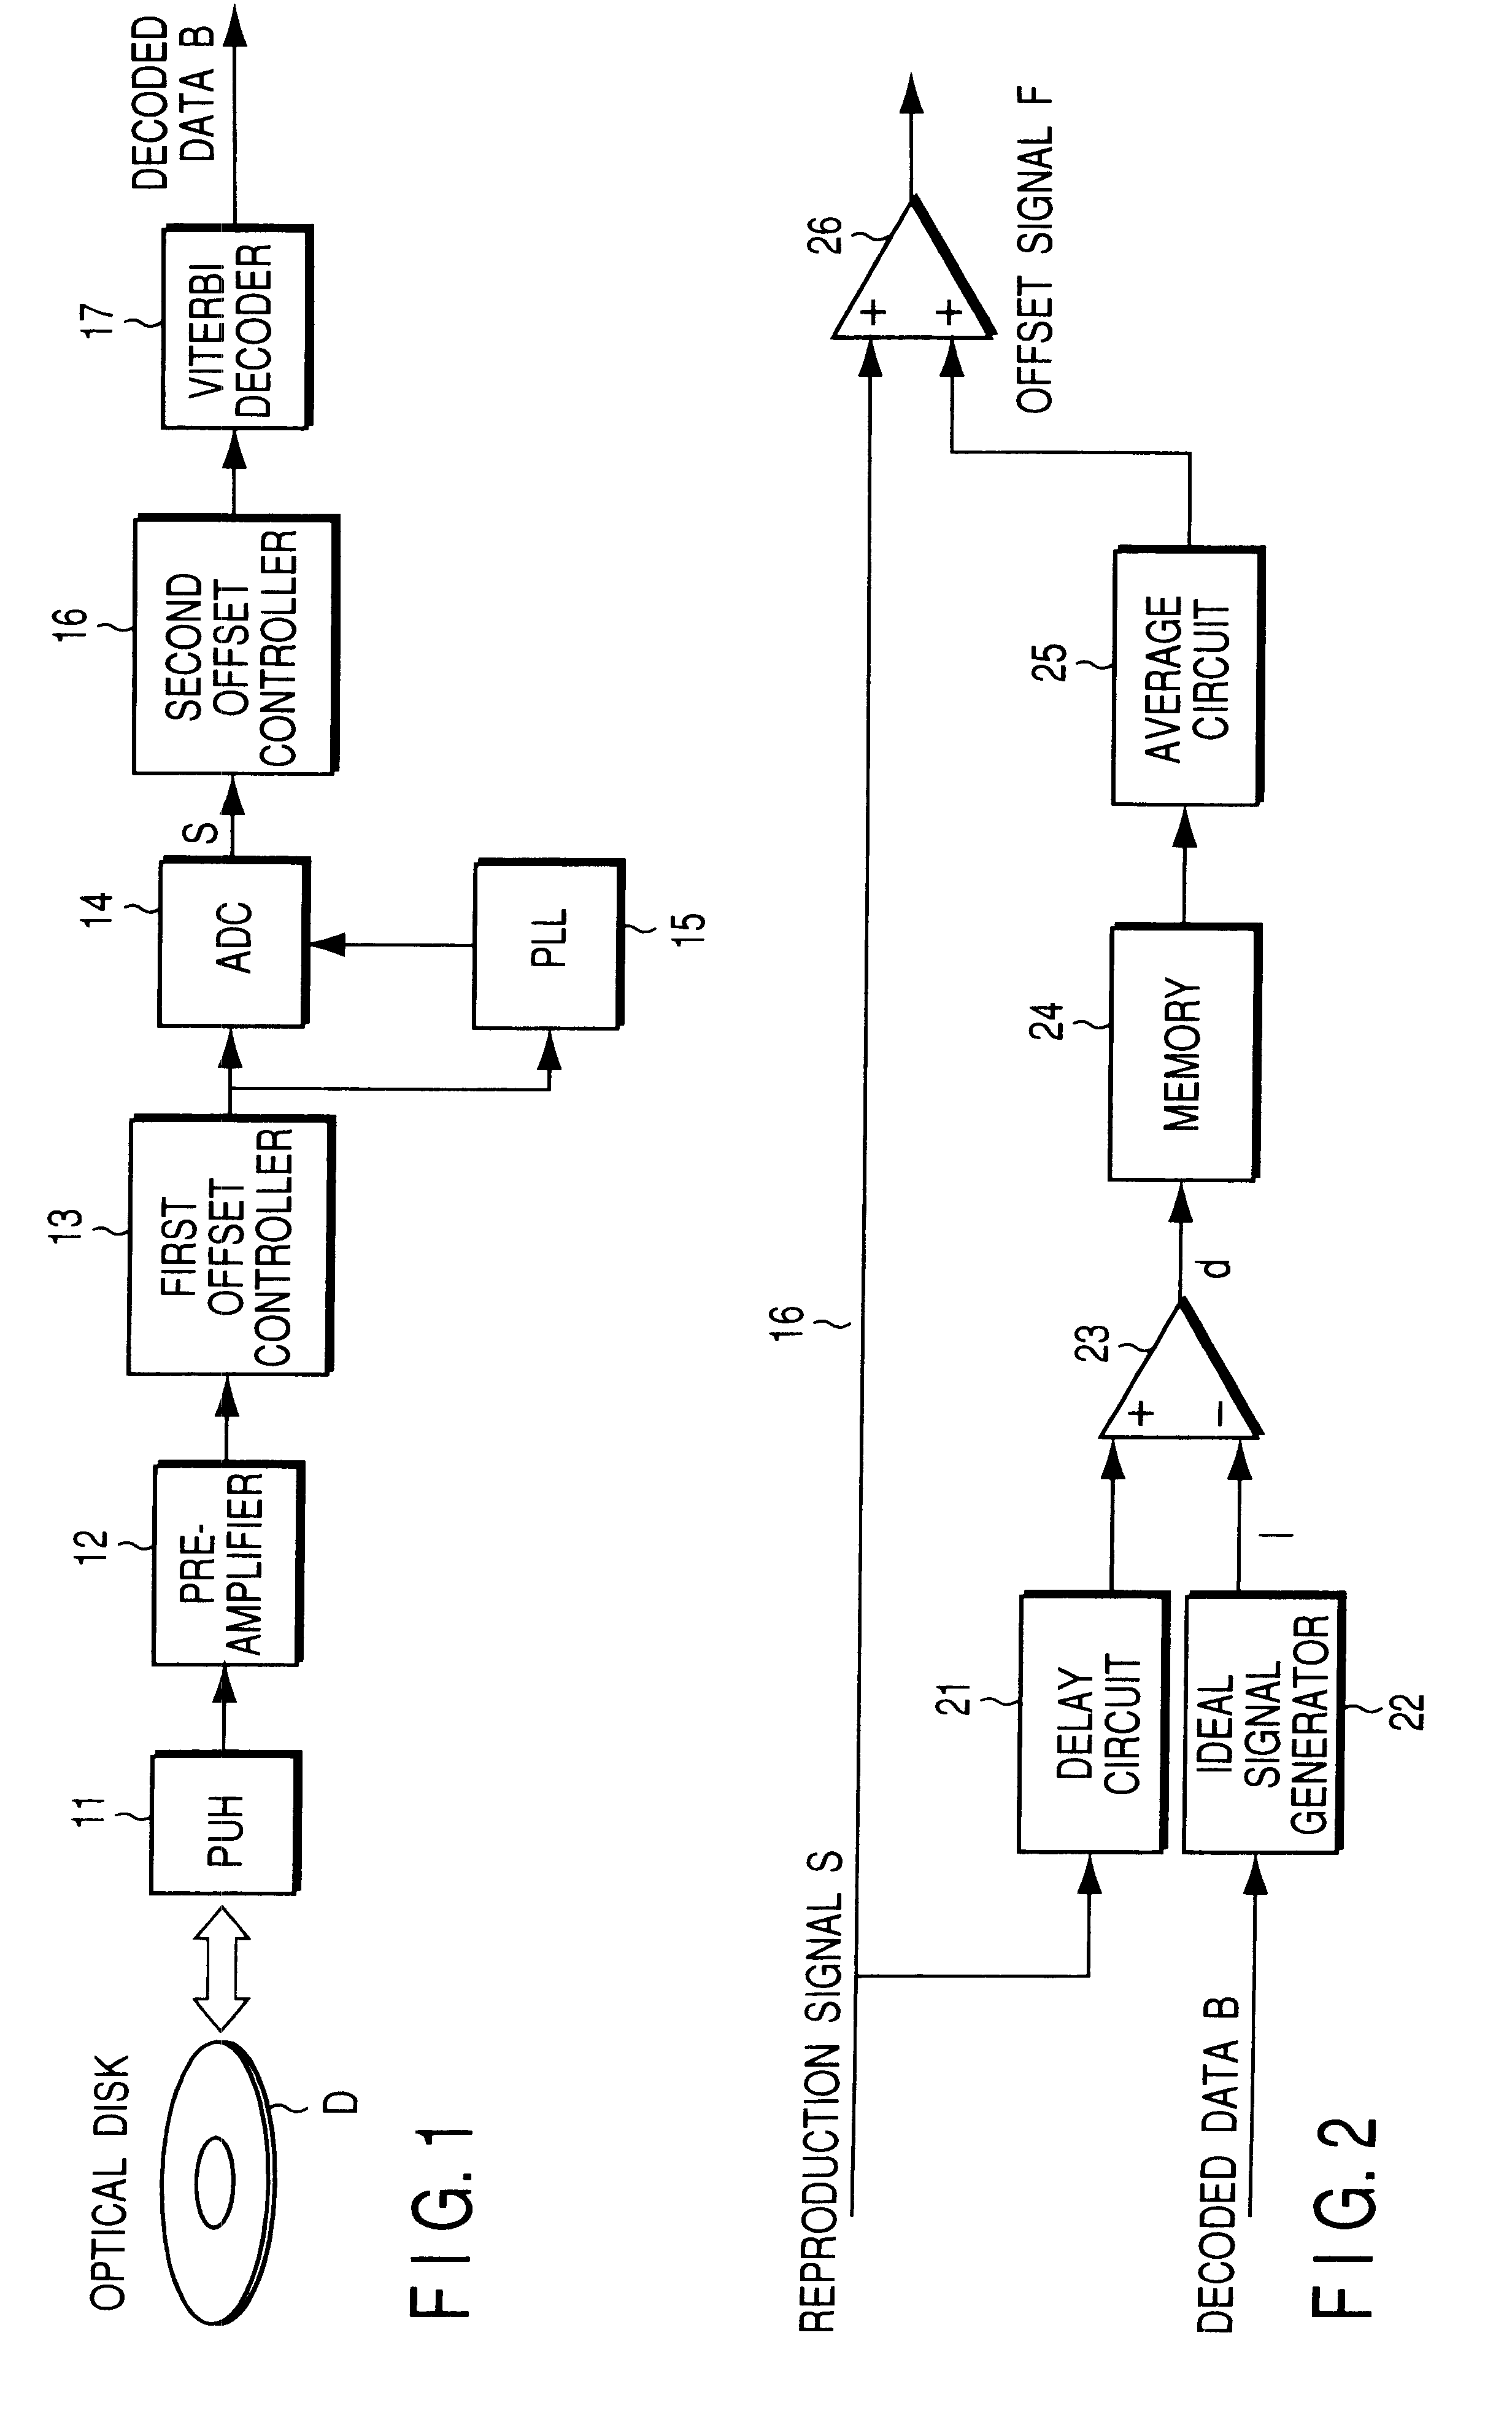 Optical disk device and information reproducing device performing maximum decoded offset process, and reproducing methods thereof